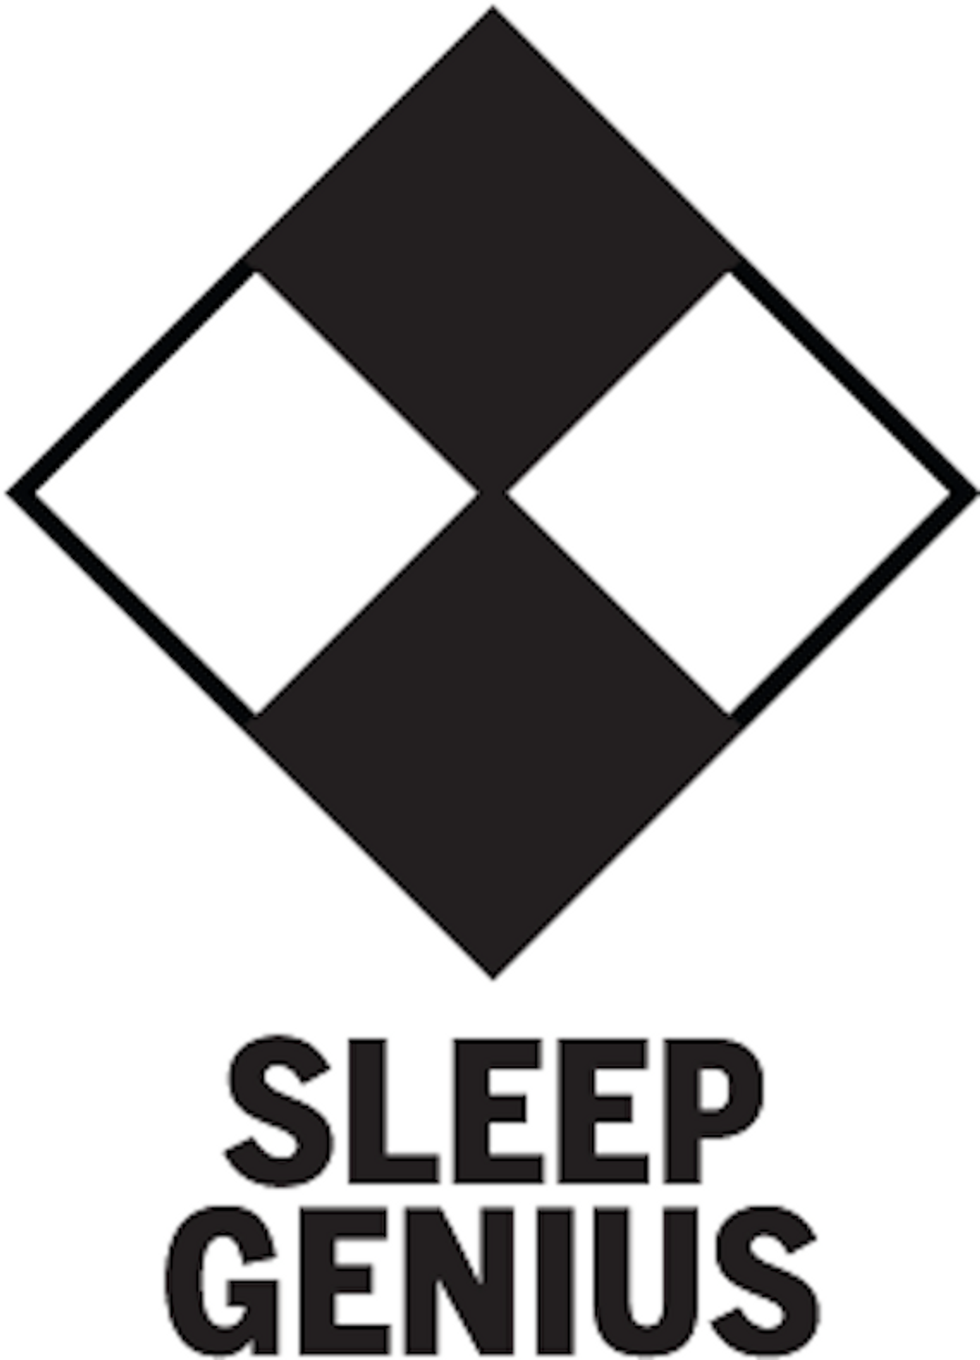 New Record Label Sleep Genius Launches at the Knockout